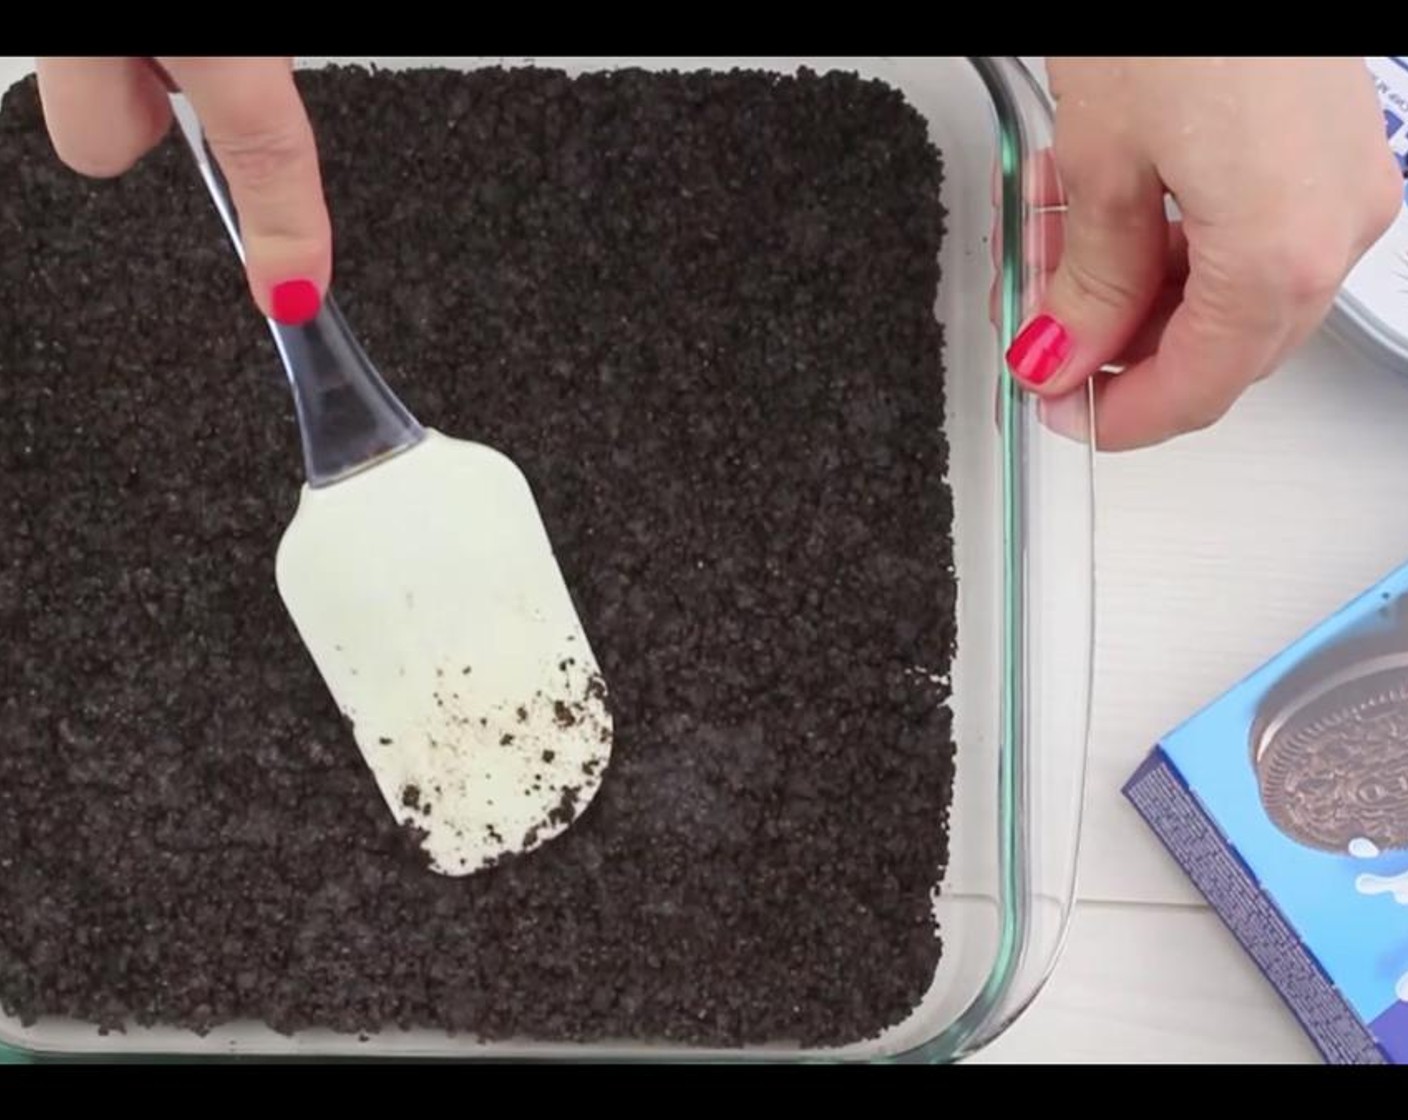 step 5 Spread half of mixture in 8x8 or 9x9 inch square baking pan and press with your fingers or some firm object to form a crust layer. Save the rest of the Oreo crumbs for later. Set aside.